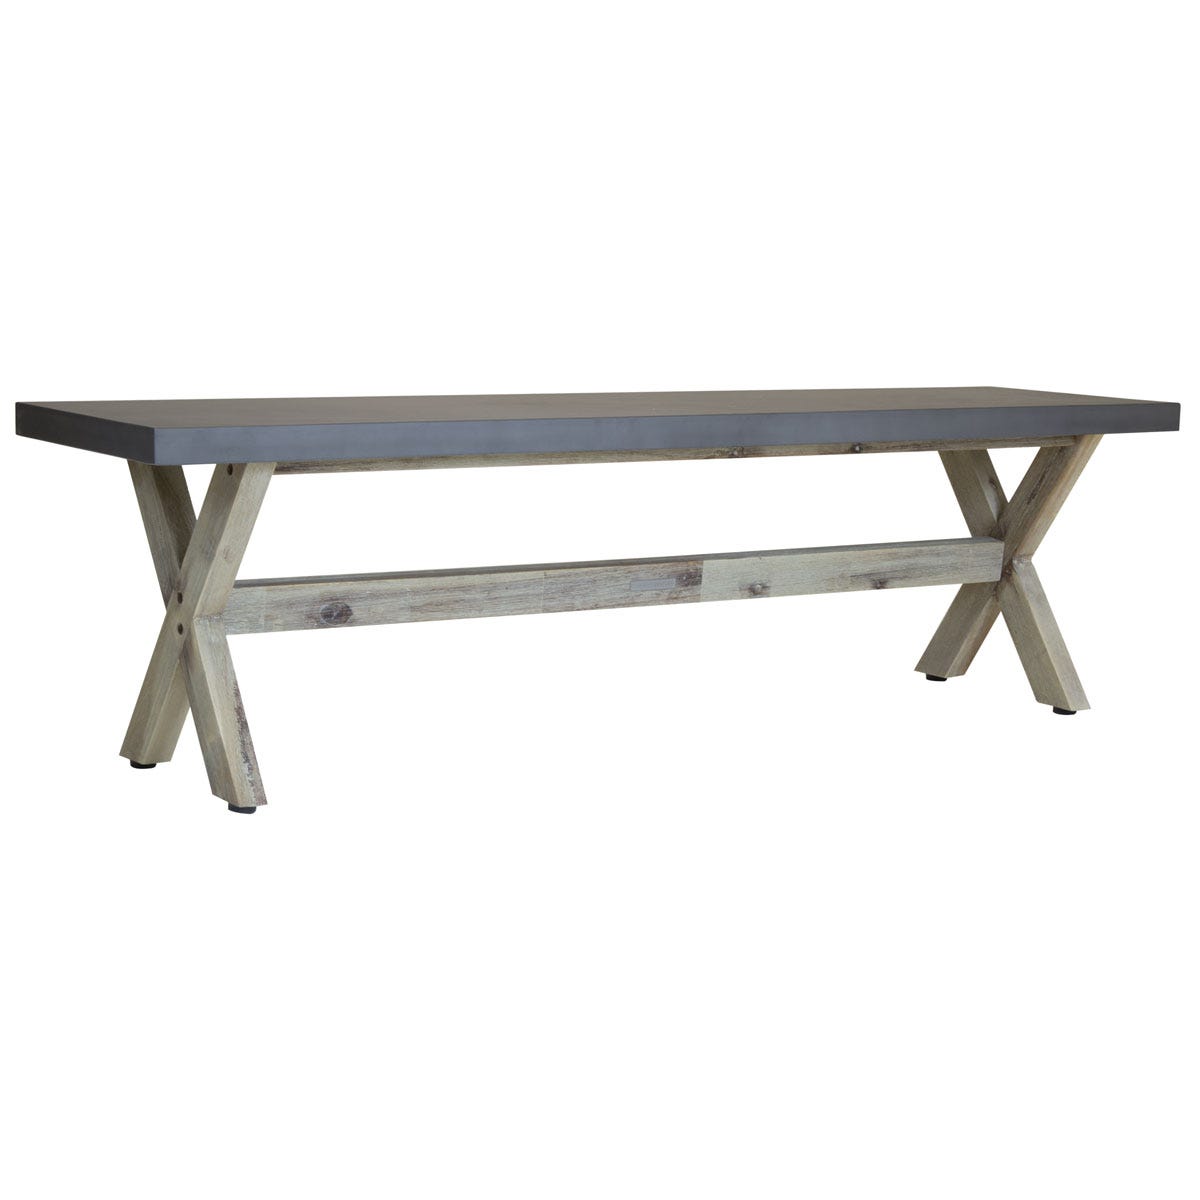 Charles Bentley Fibre Cement Wood Dining Bench